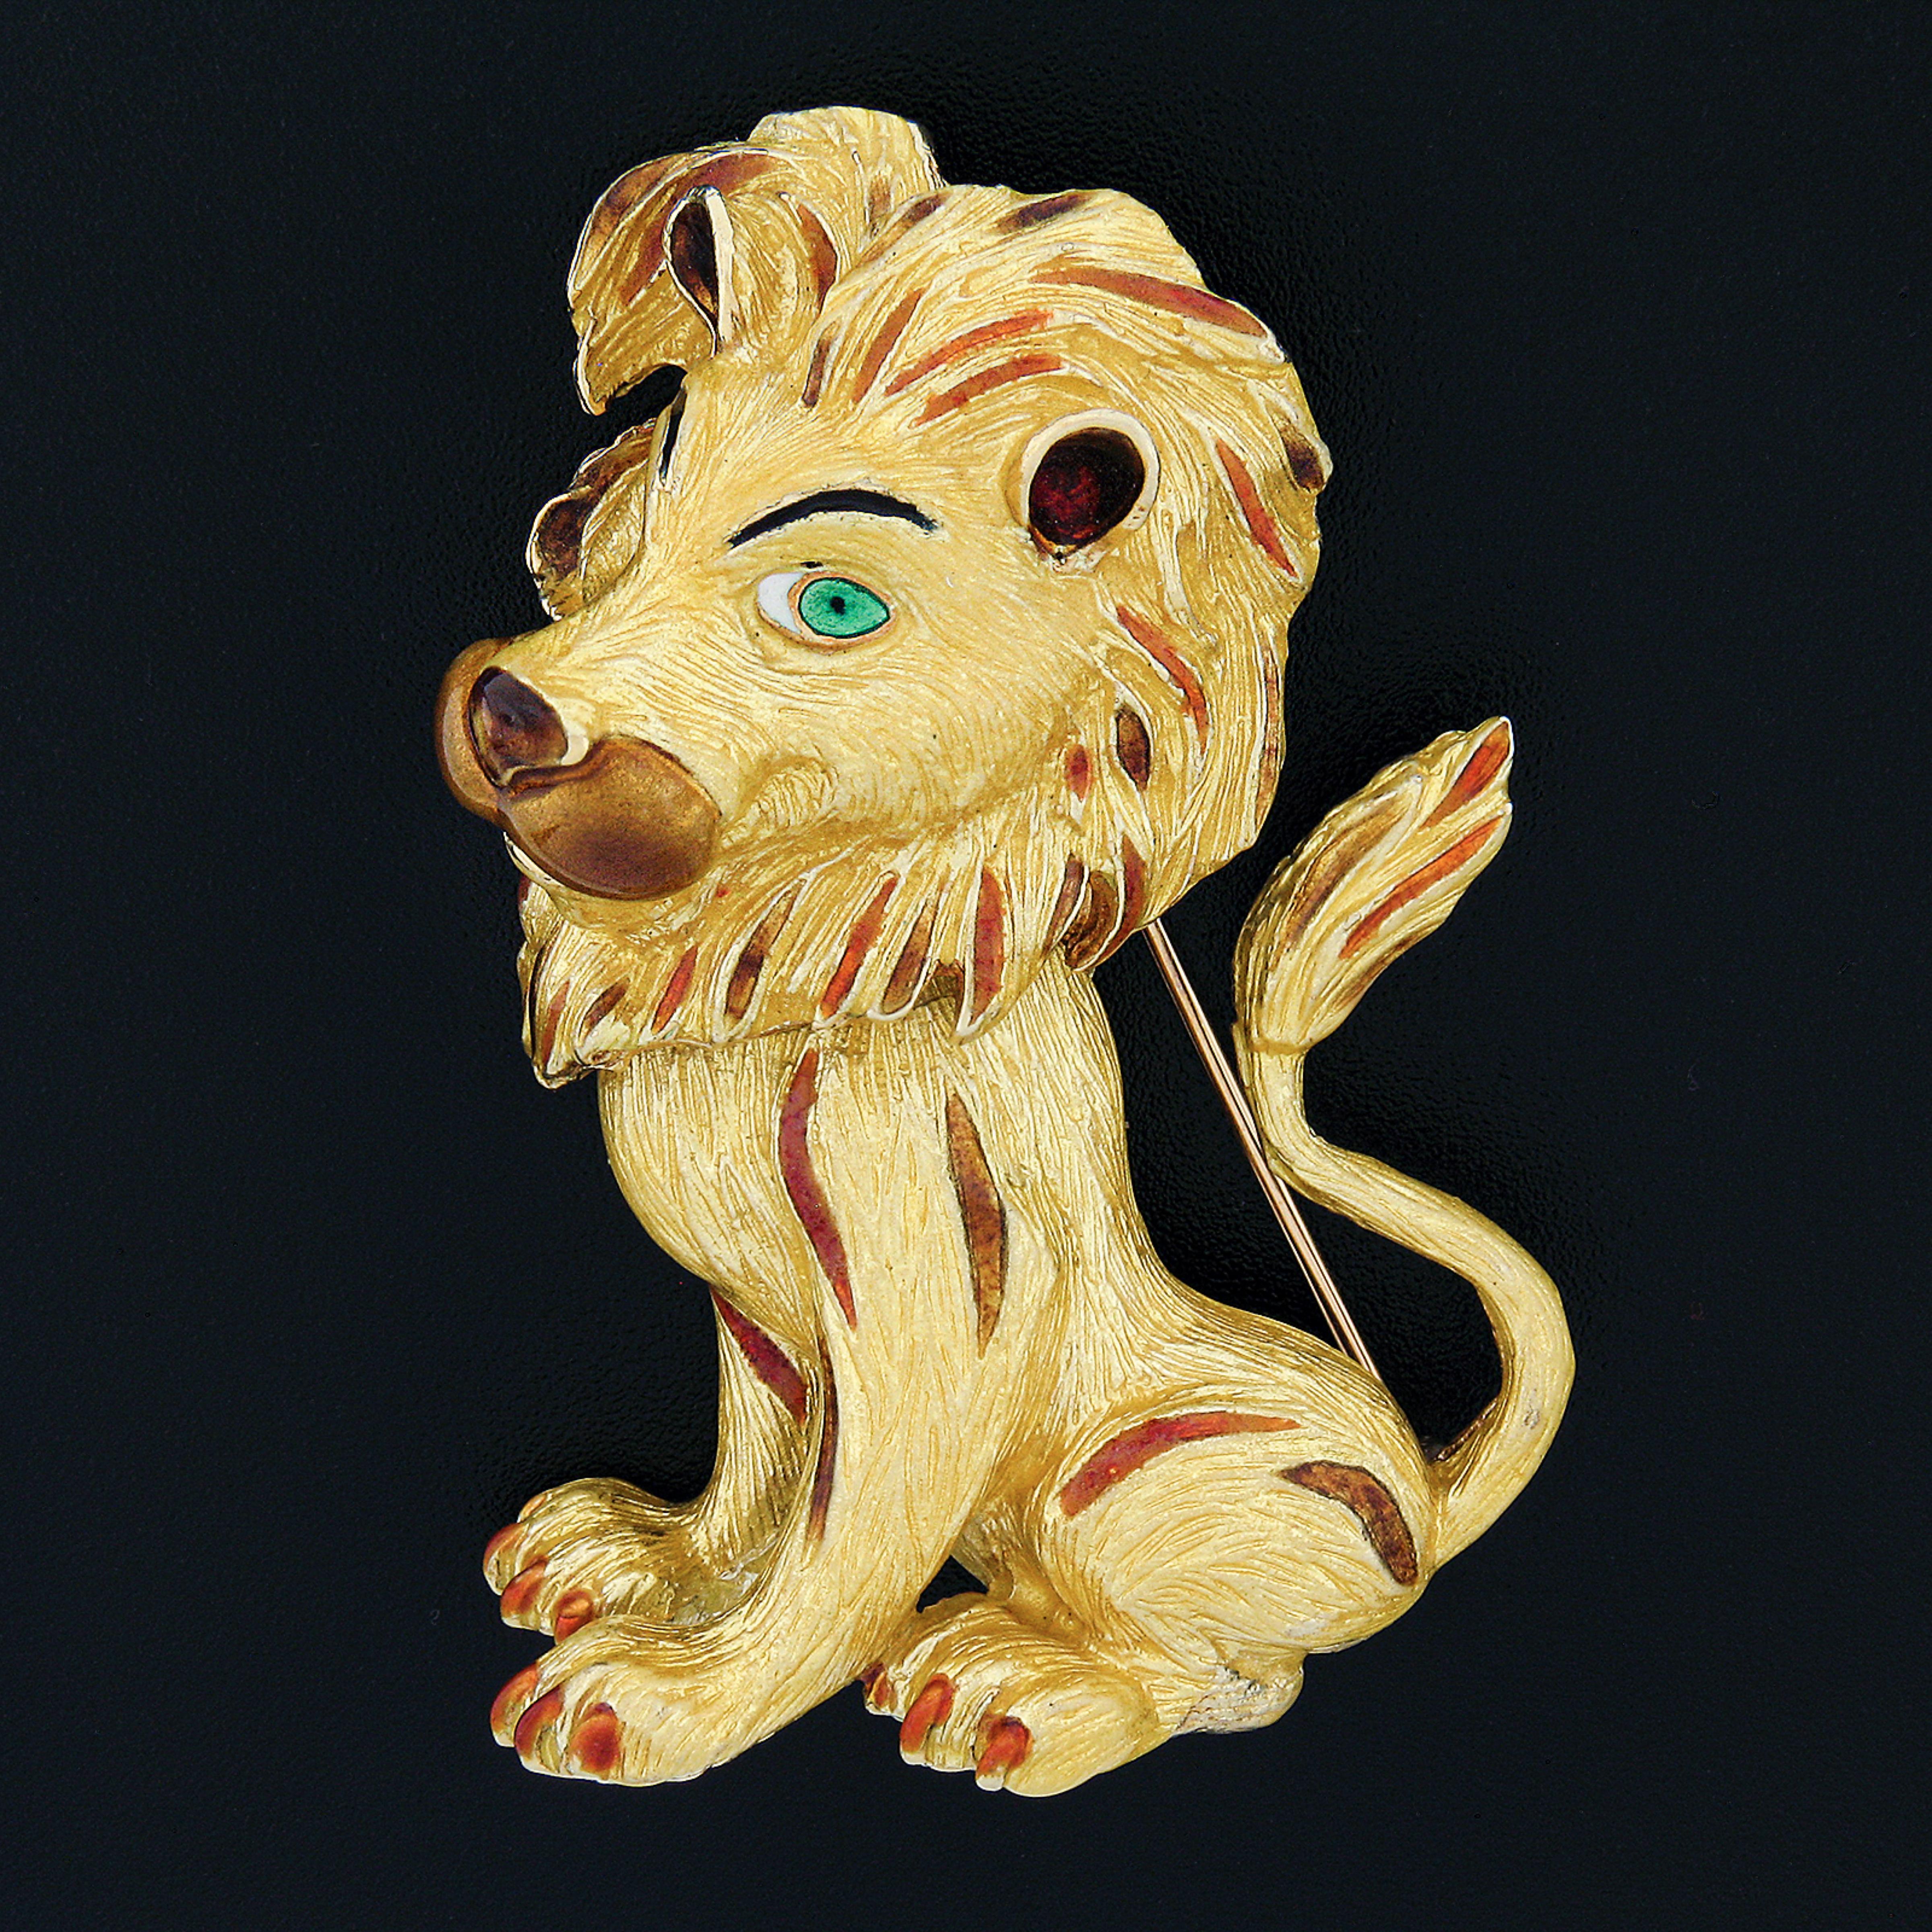 This magnificent vintage brooch/pin is crafted in solid 18k yellow gold and features a perfectly structured cartoony lion design with unique, and remarkably outstanding workmanship and texture that bring out maximum detailing granting an exceptional